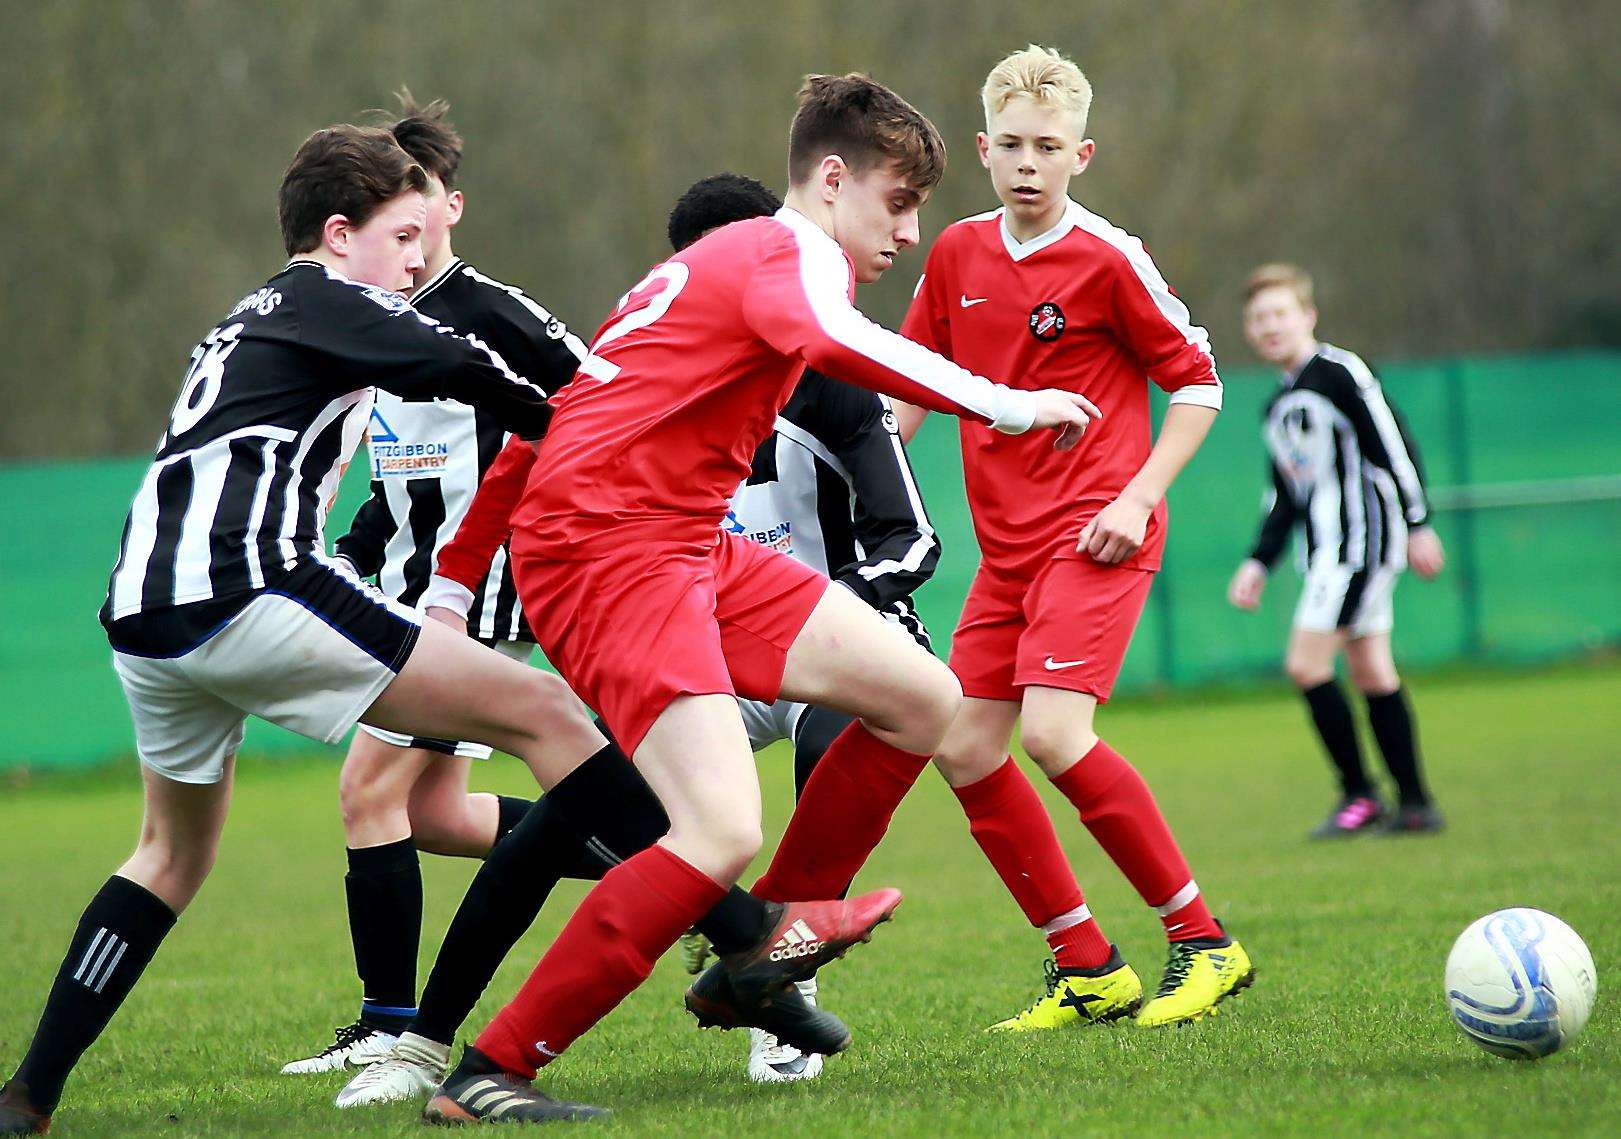 Rainham Kenilworth under-14s (red) in action against Milton & Fulston United under-14s during their League Cup final on Sunday. Picture: Phil Lee FM1498089